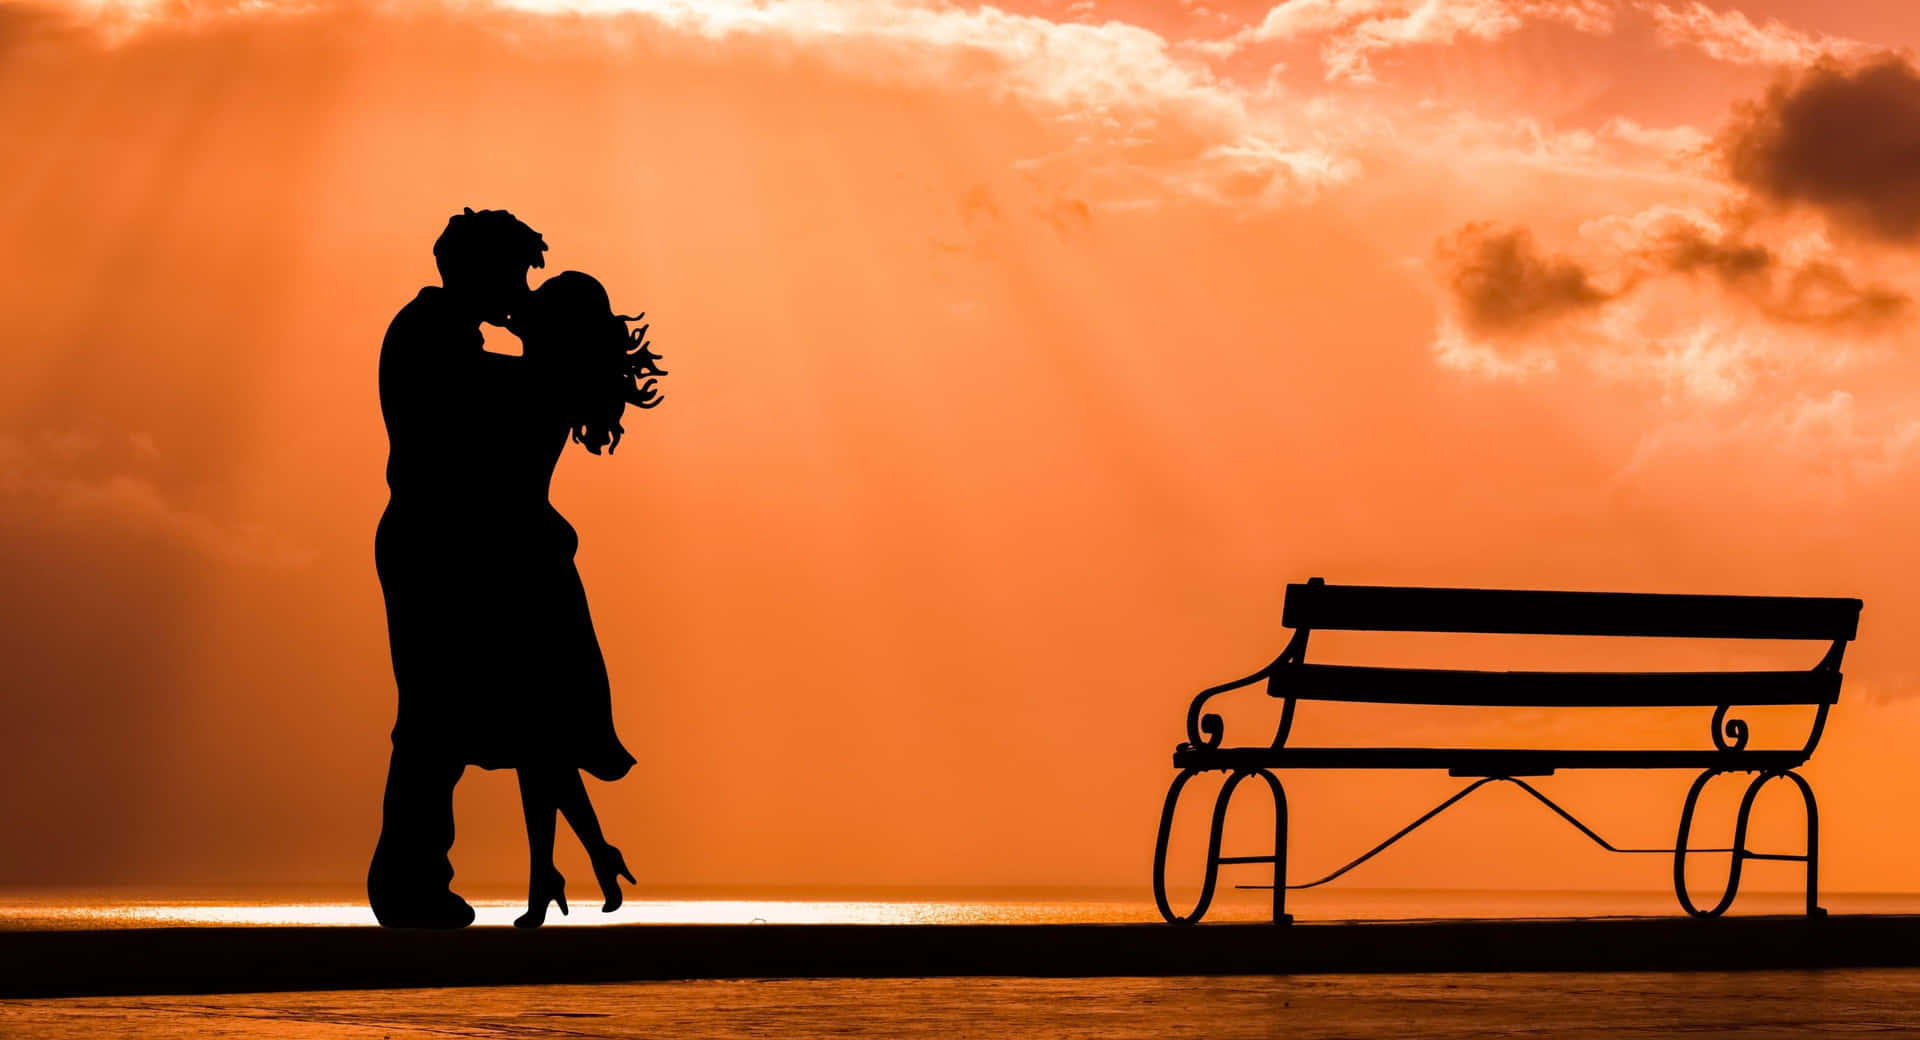 A romantic couple embracing and enjoying the sunset